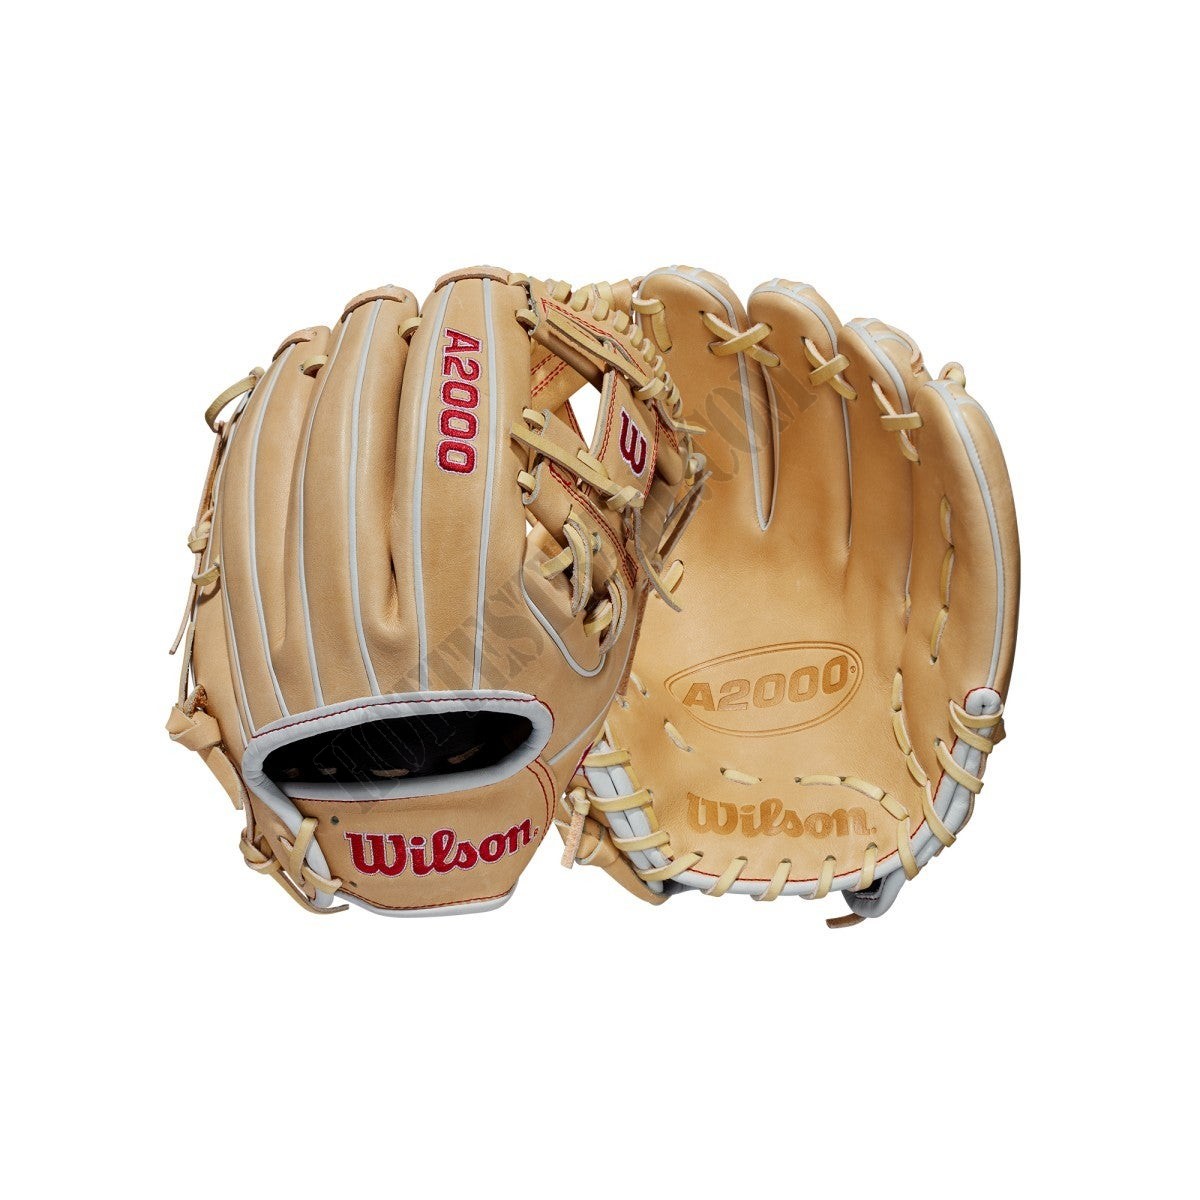 2021 A2000 1786 Bronco 11.5" Infield Baseball Glove - Right Hand Throw ● Wilson Promotions - -0